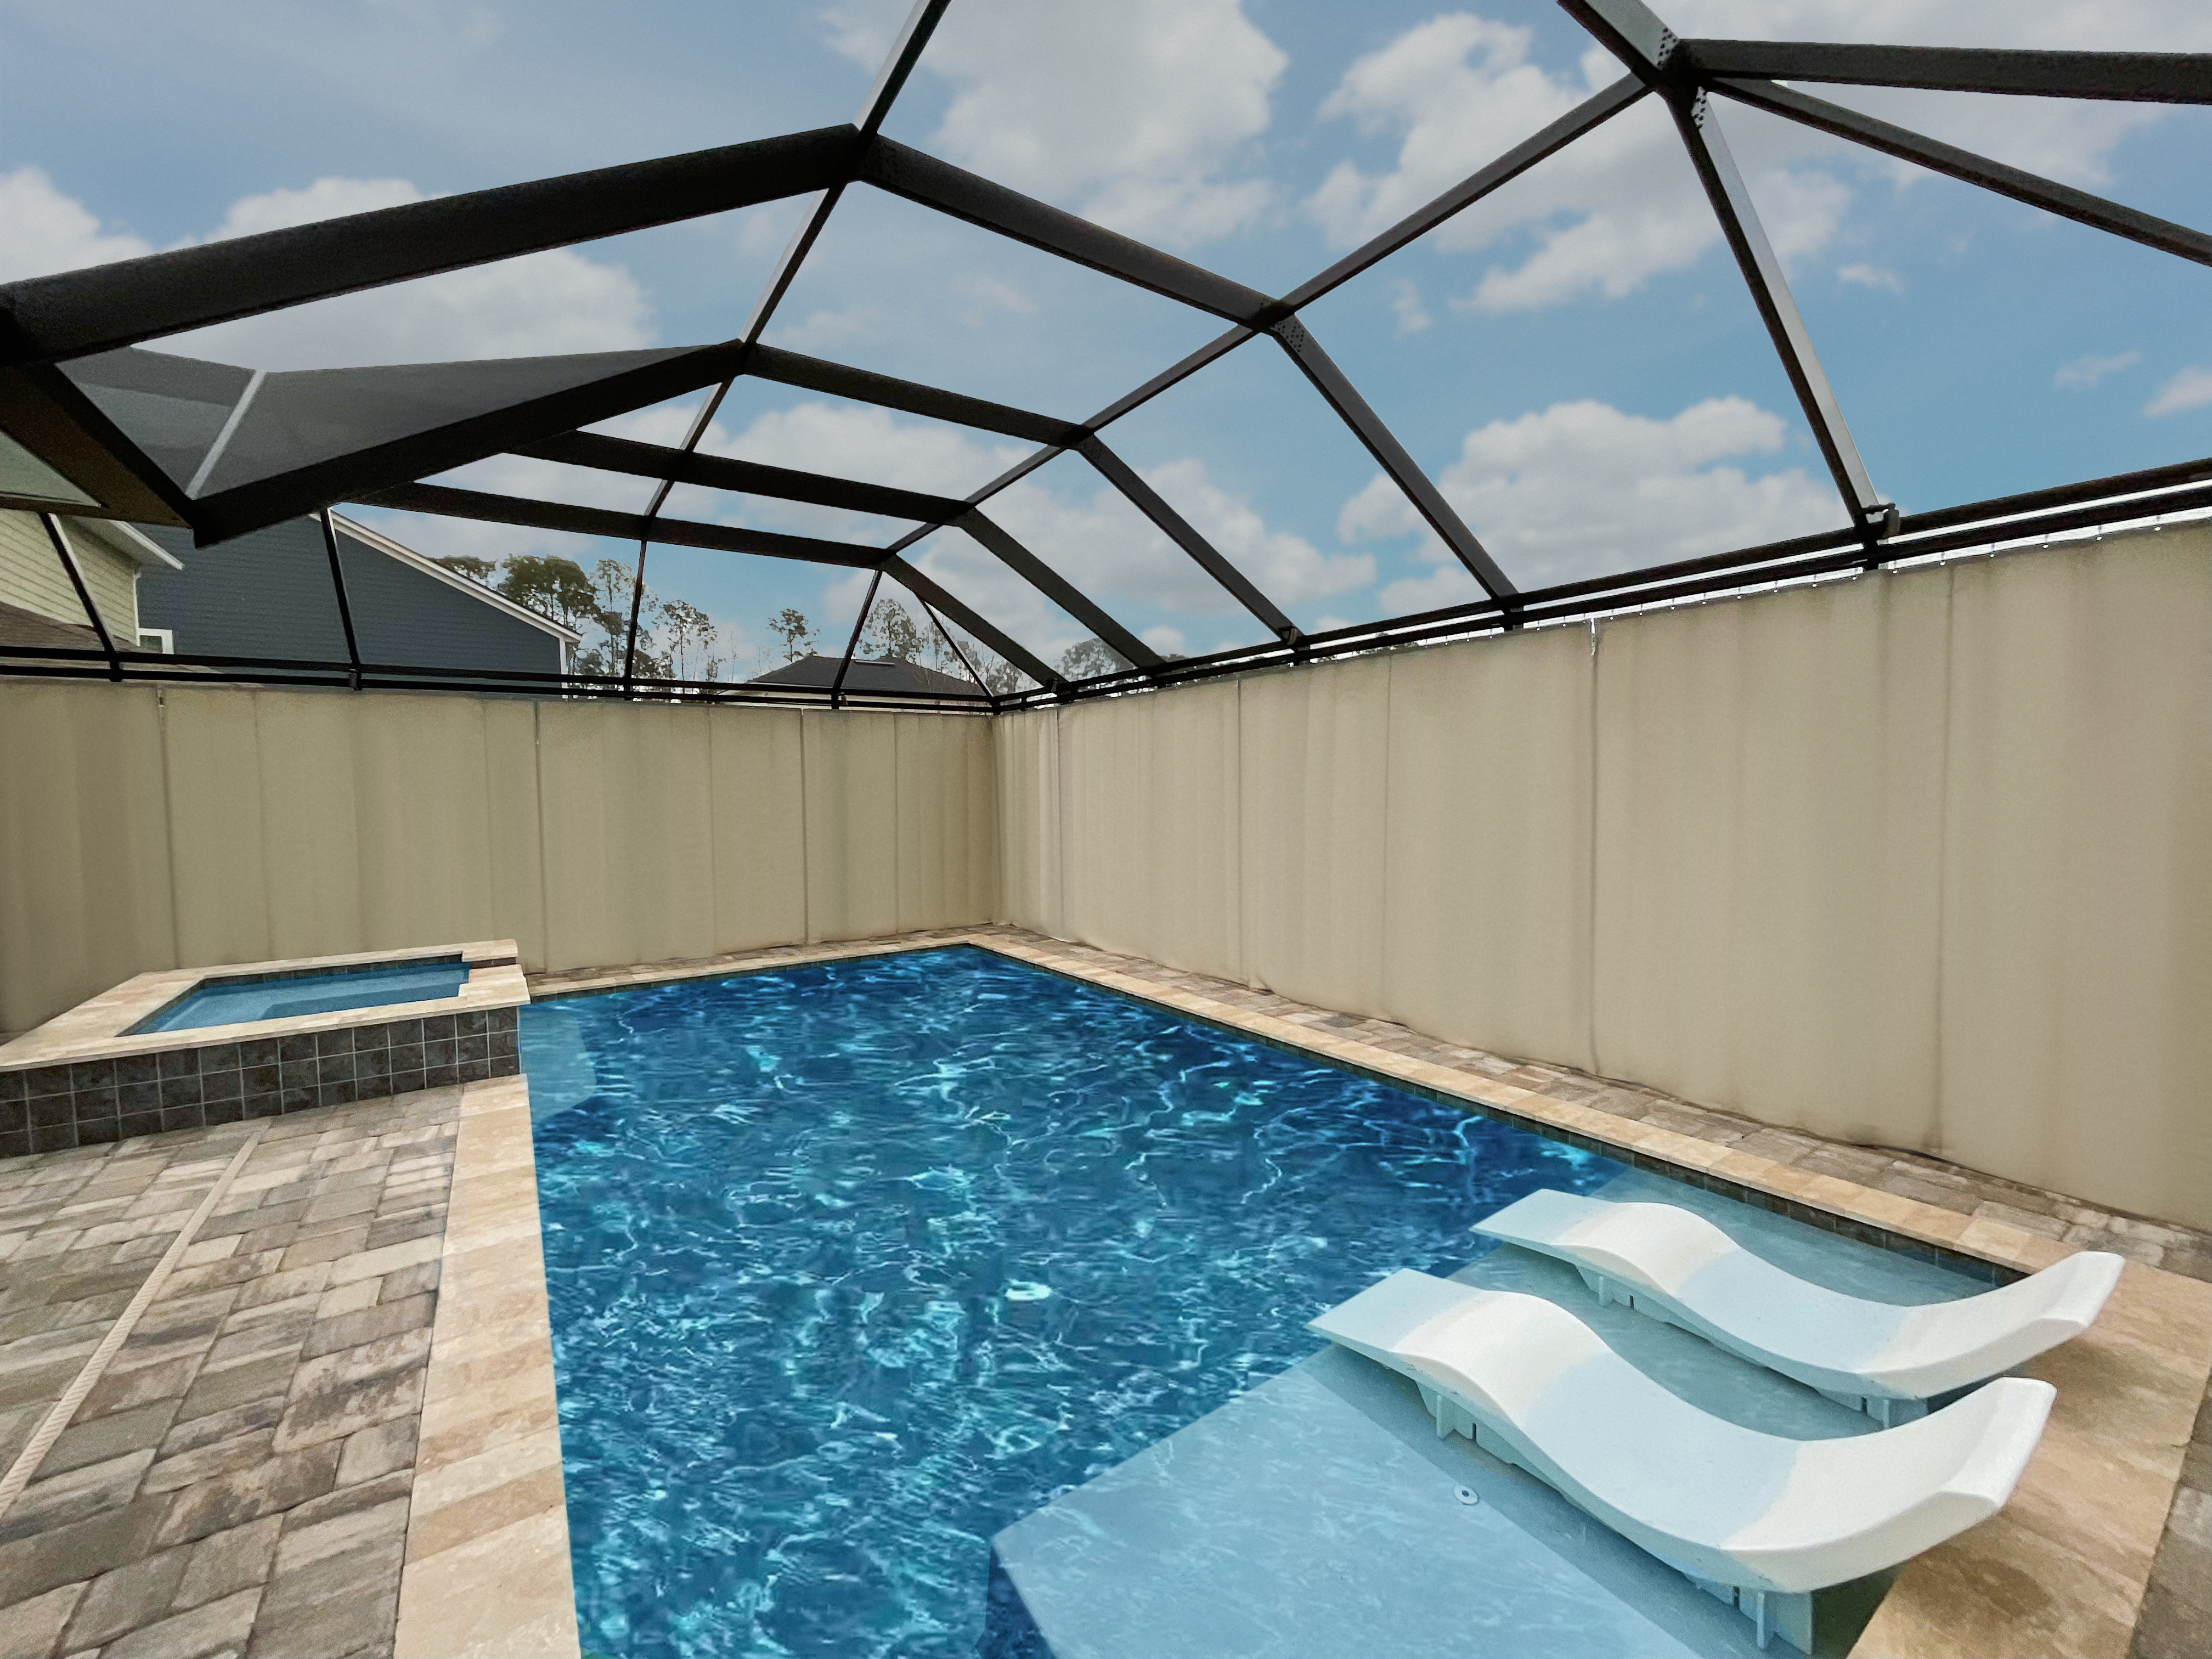 A pool deck with Privacy on Demand privacy curtains attached to the perimeter of the pool cage.